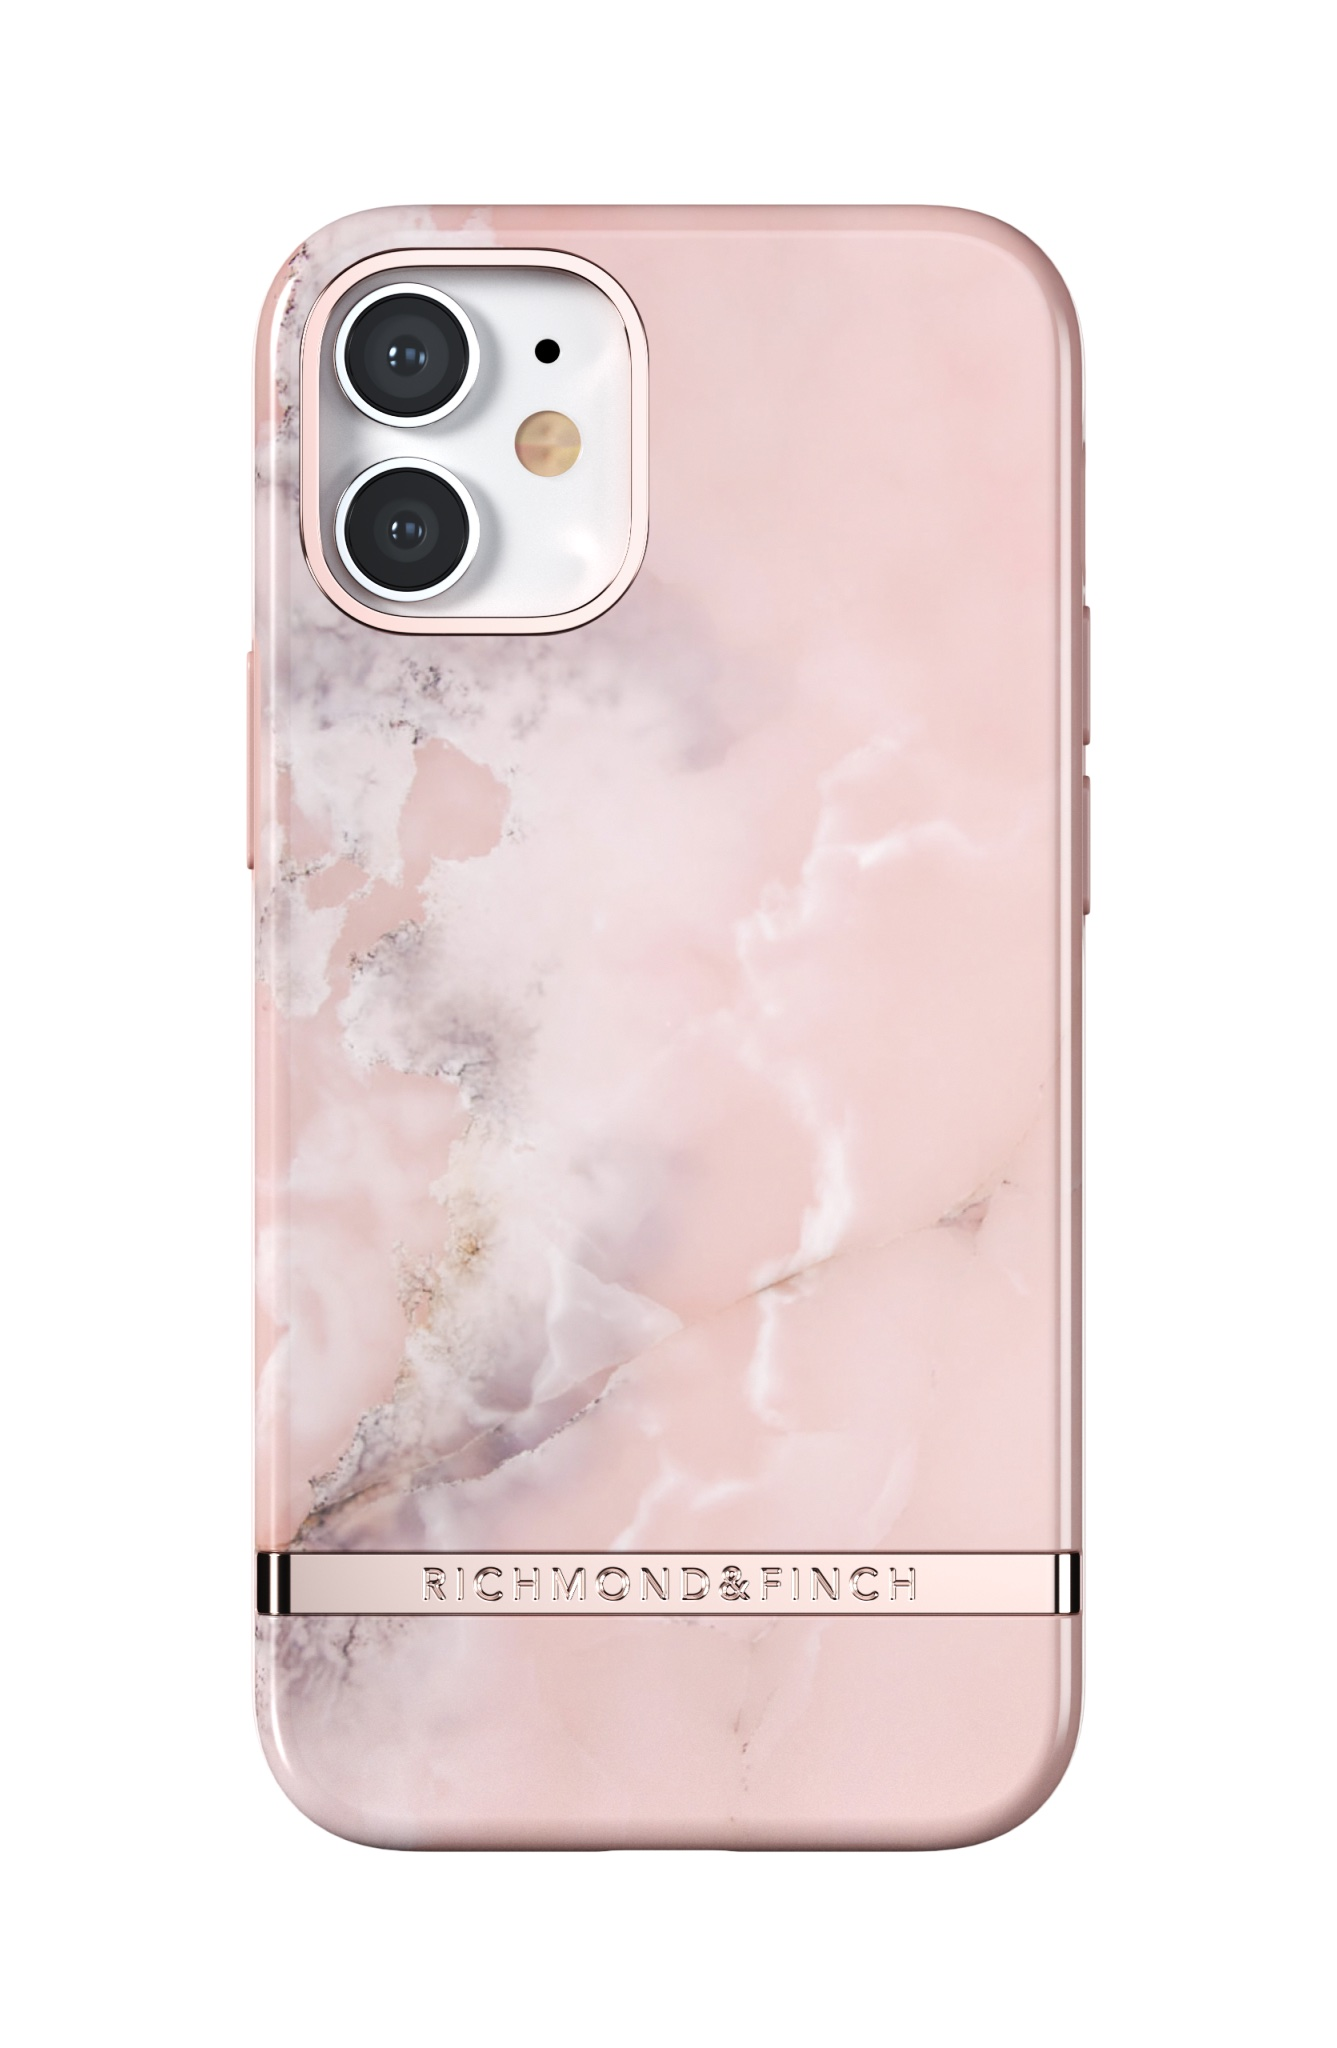 RICHMOND & iPhone 12 MINI, mini, APPLE, FINCH Pink Backcover, IPHONE 12 PINK Marble